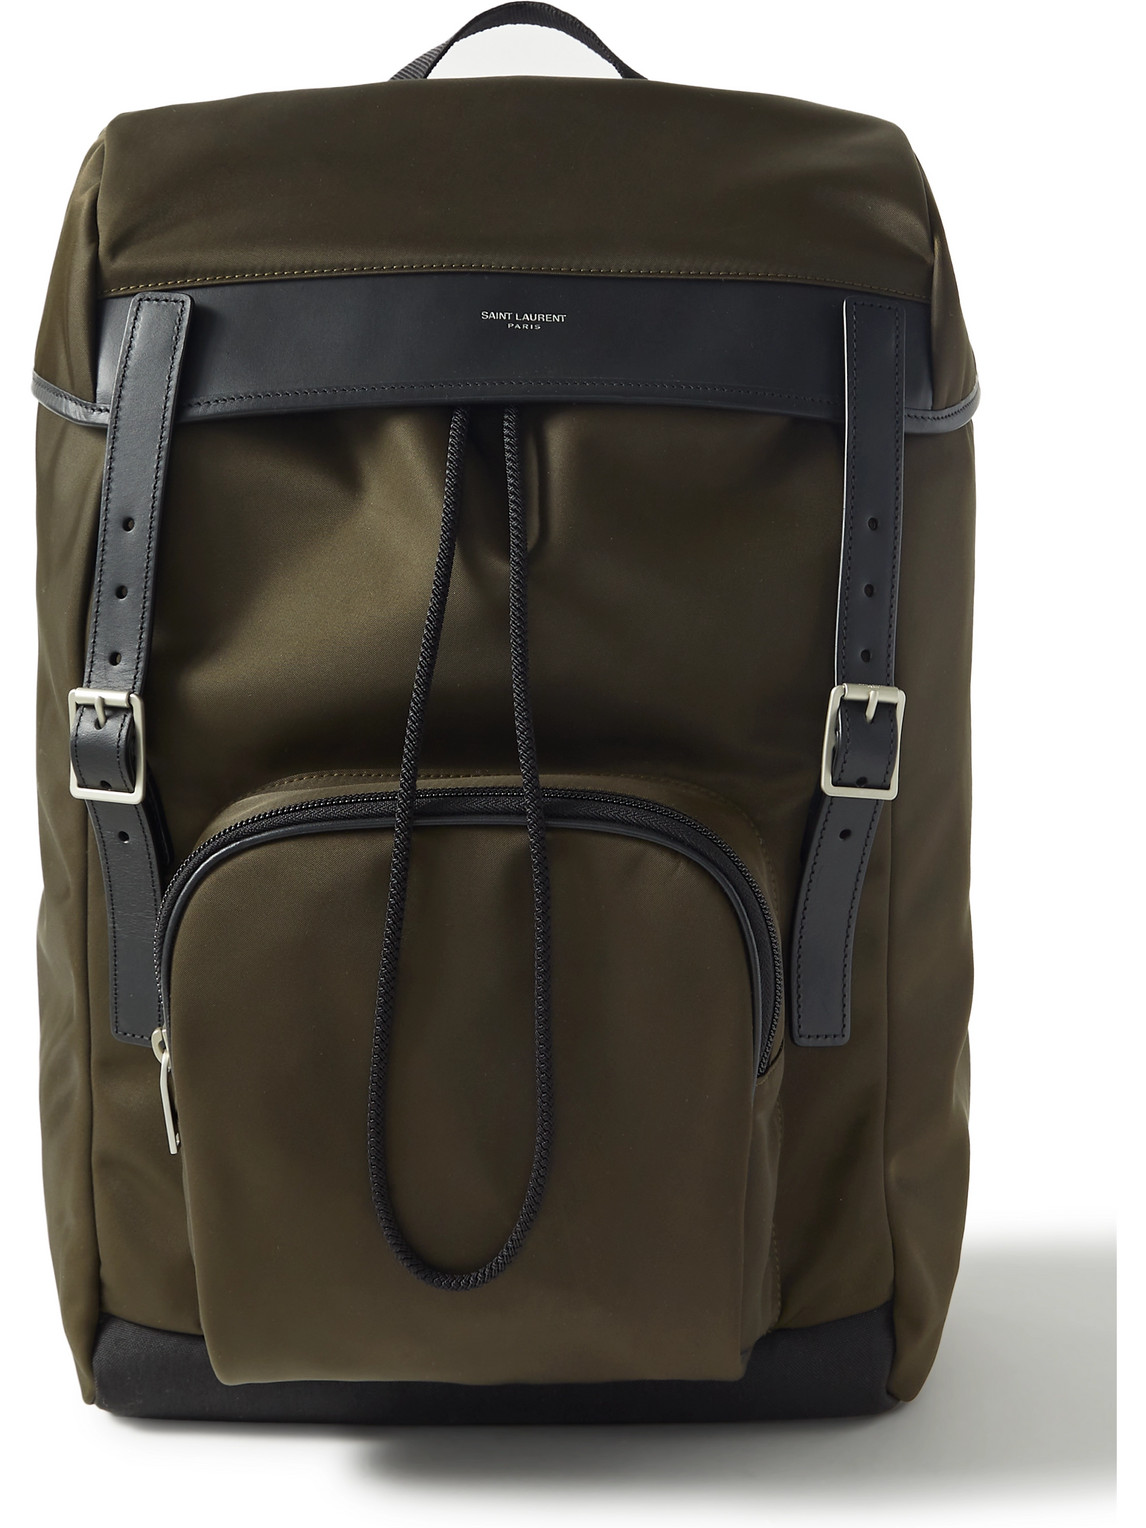 City Flap Leather-Trimmed Econyl Backpack